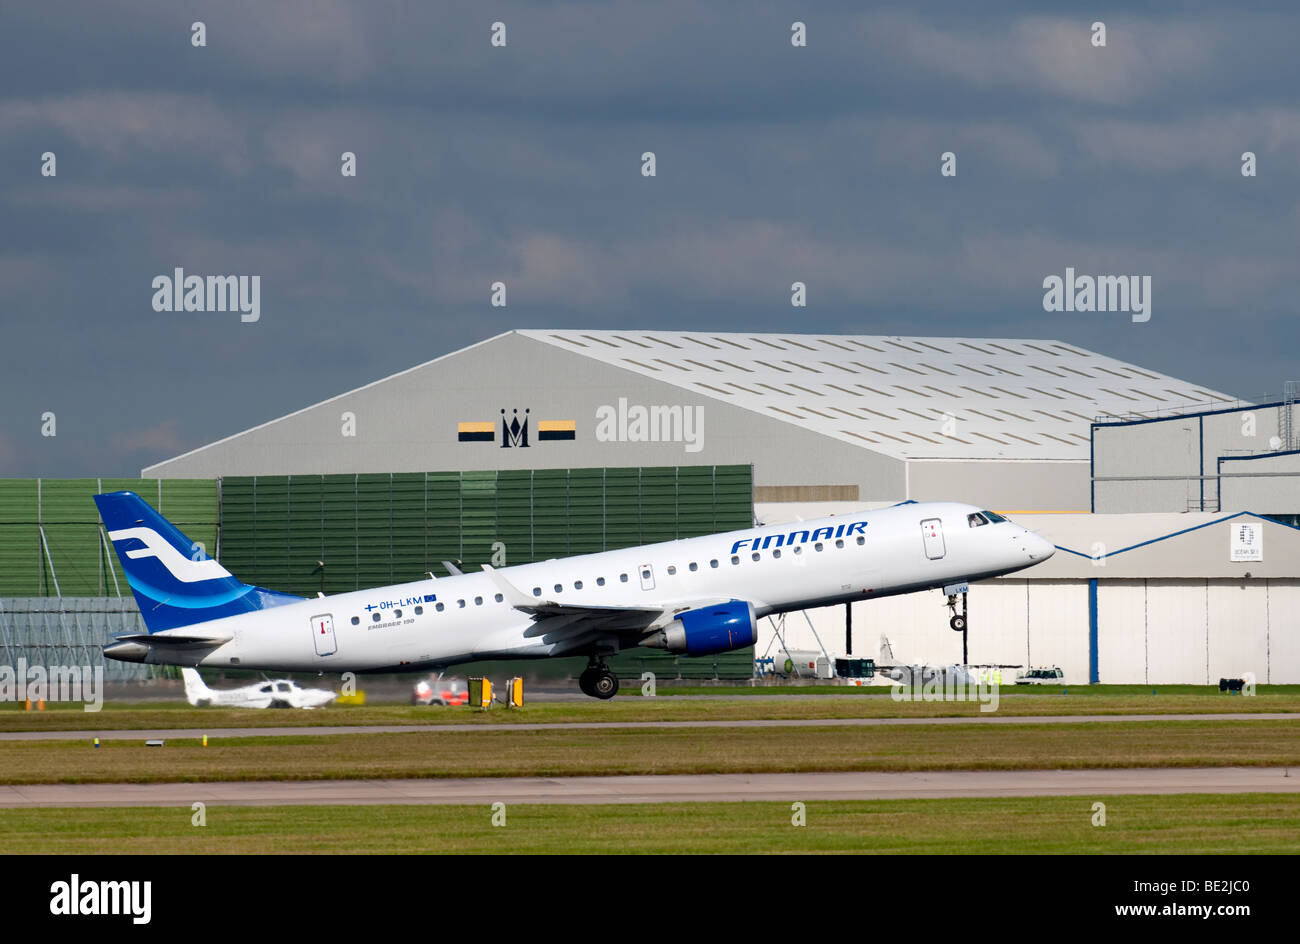 Finnair aircraft taking off from Manchester Airport (Ringway Airport) Stock Photo